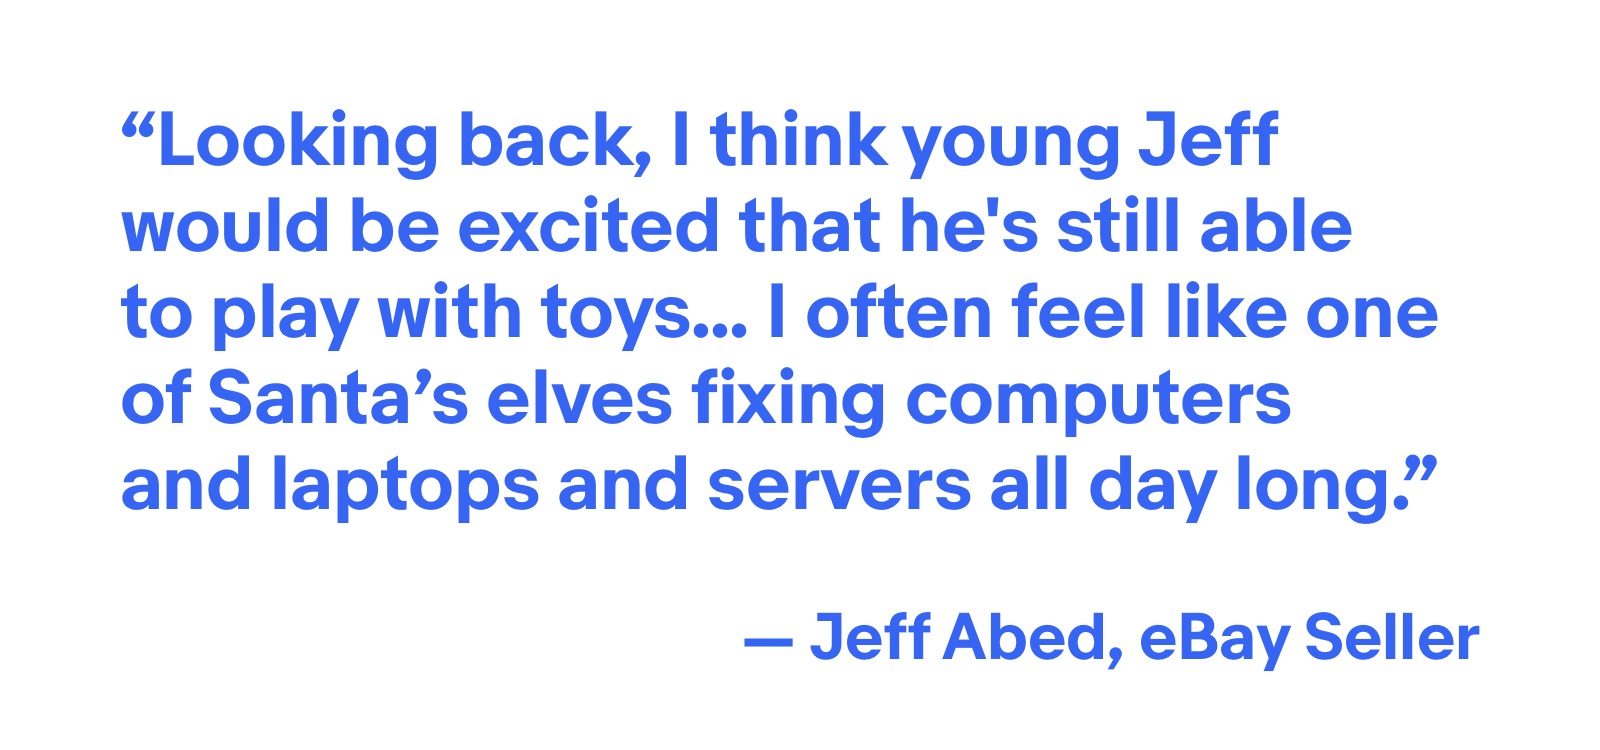 Looking back, I think young Jeff would be excited that he’s still able to play with toys. - Jeff Abed, eBay Seller